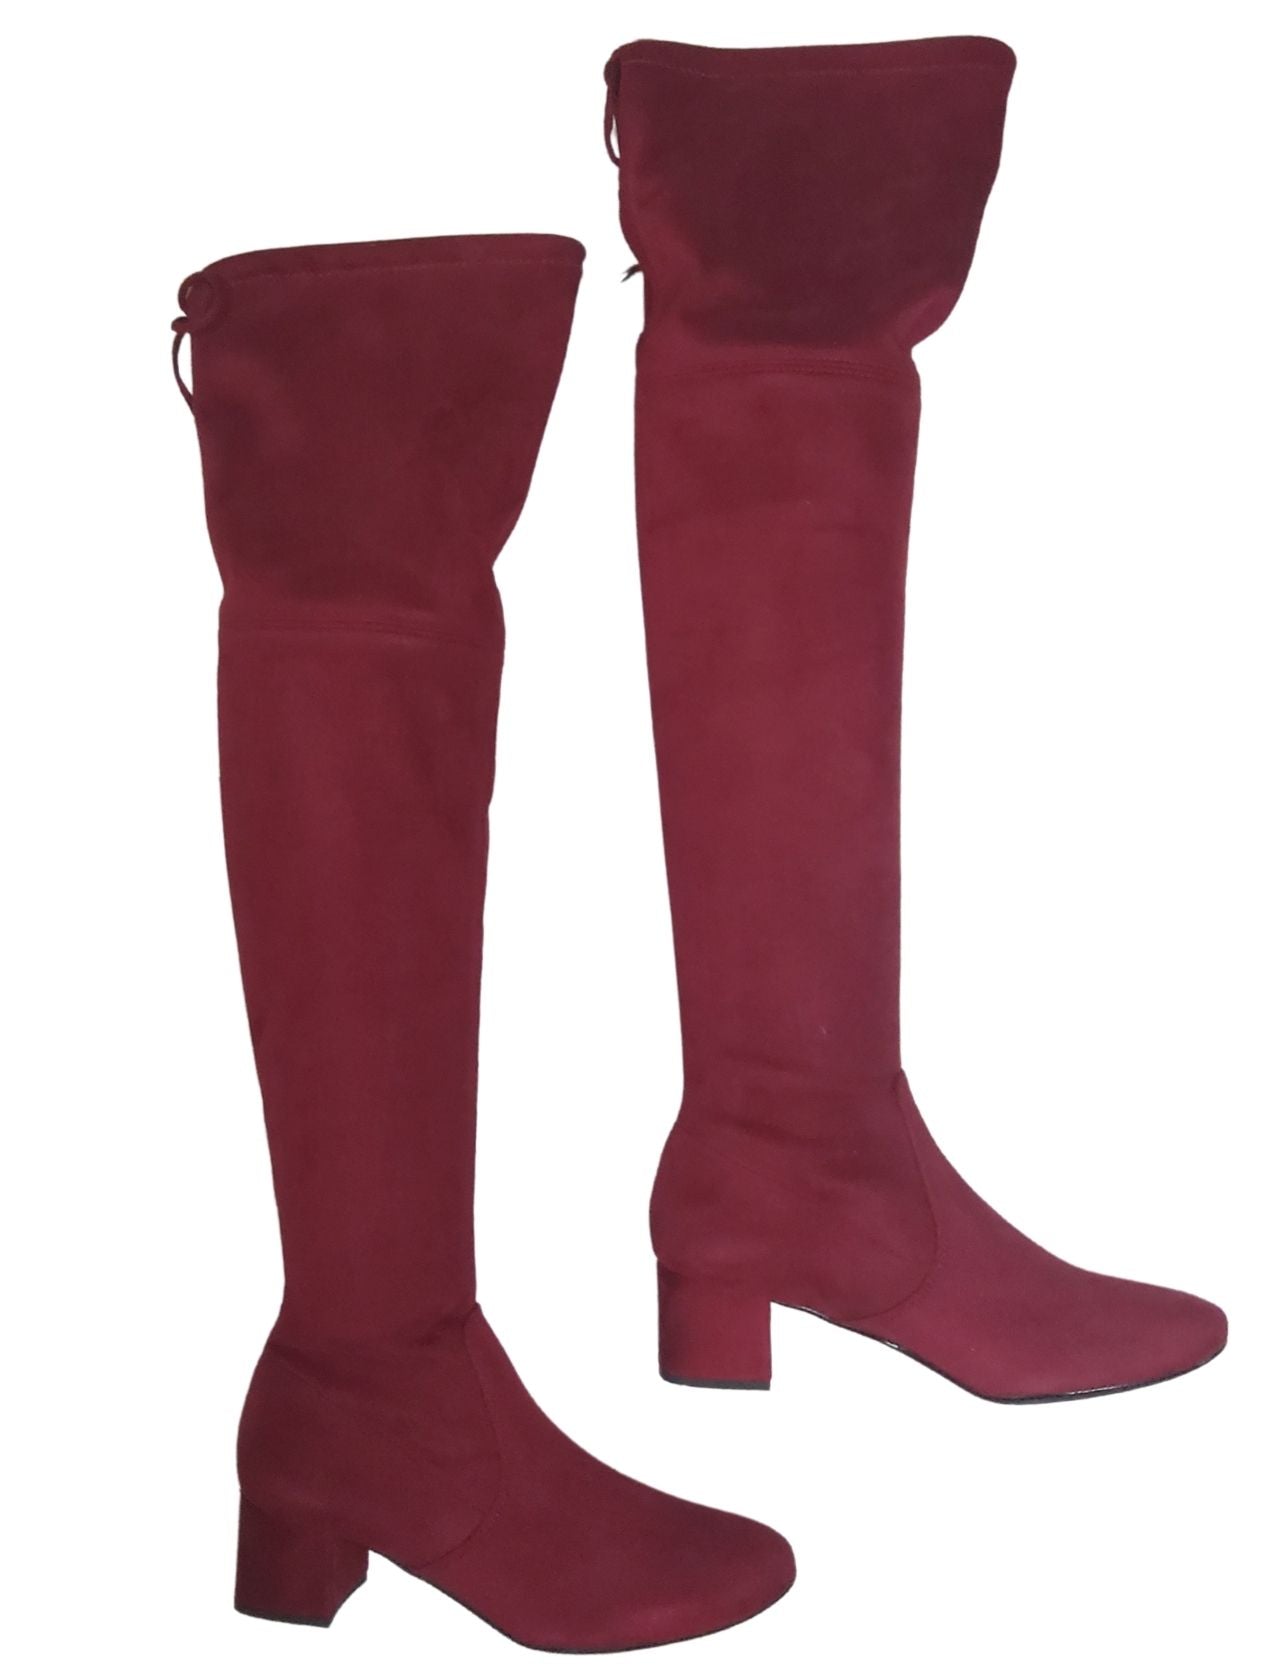 Women's Footwear Over-the-knee boot in red eco suede with rear laces